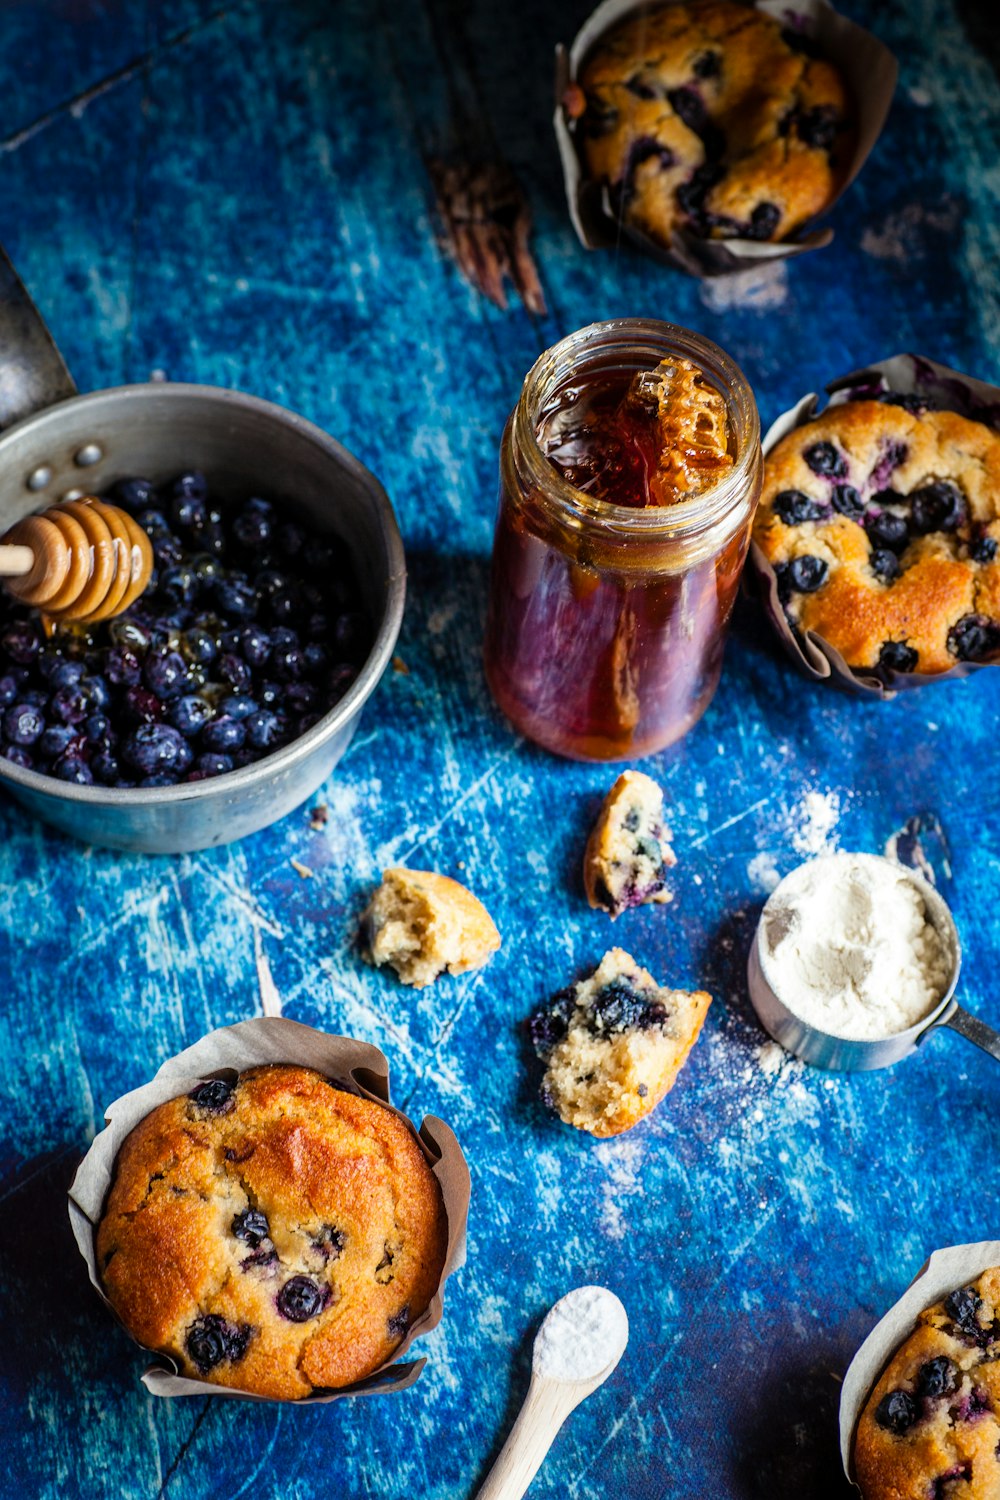 blueberries on gray bowl and muffins